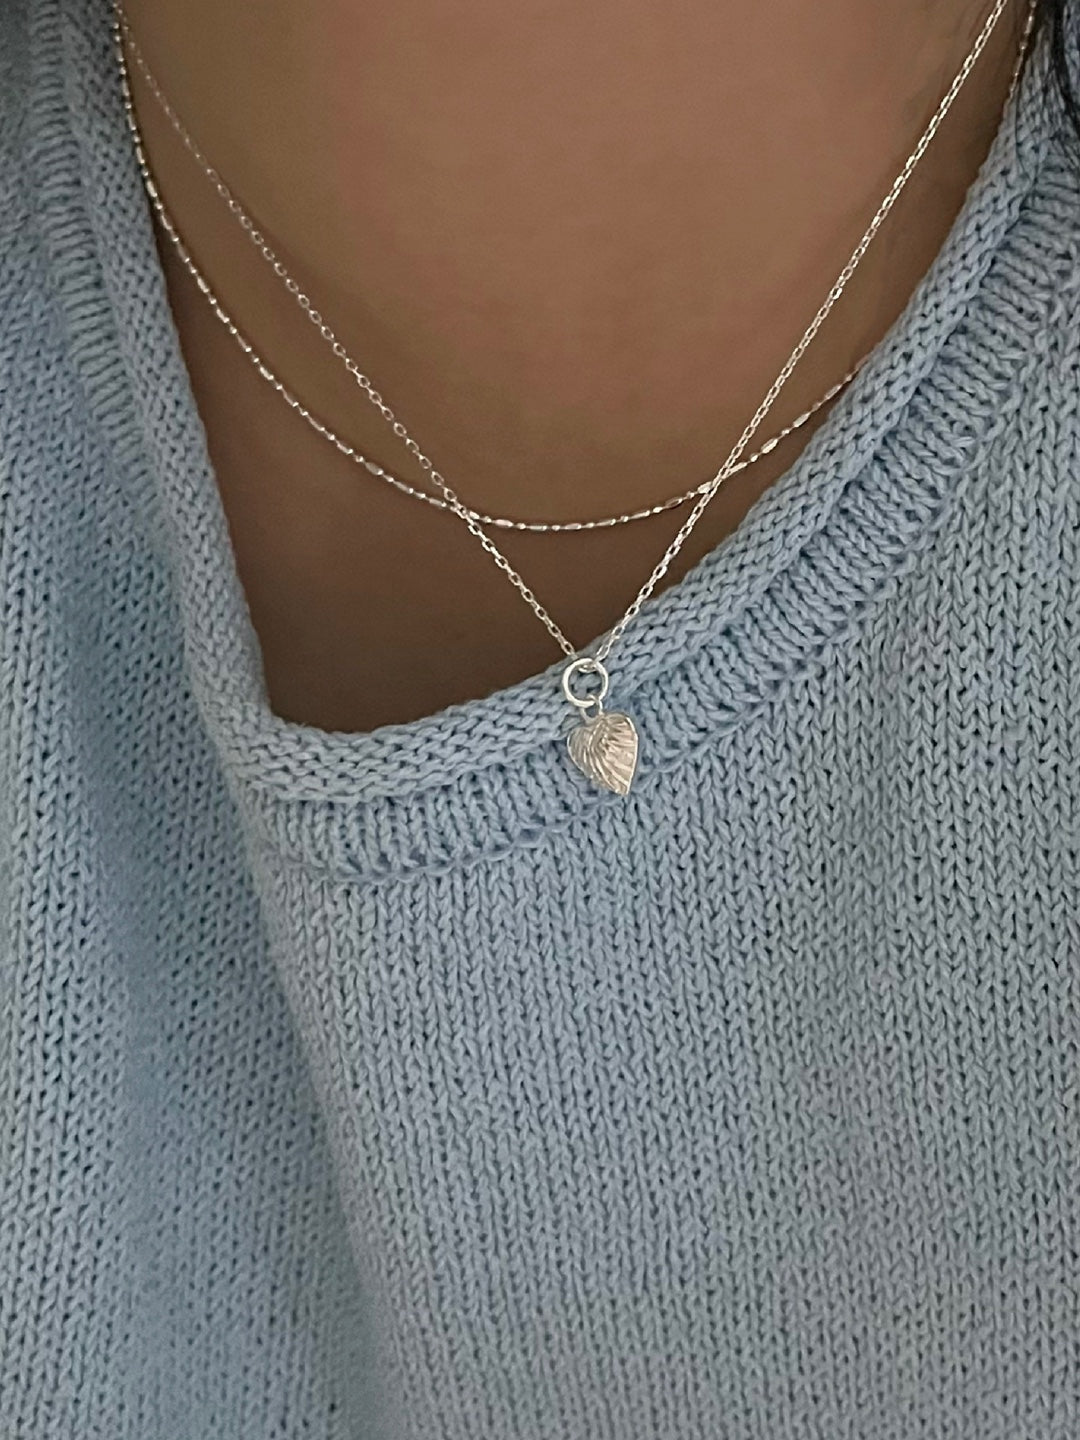 (silver925) Somez necklace